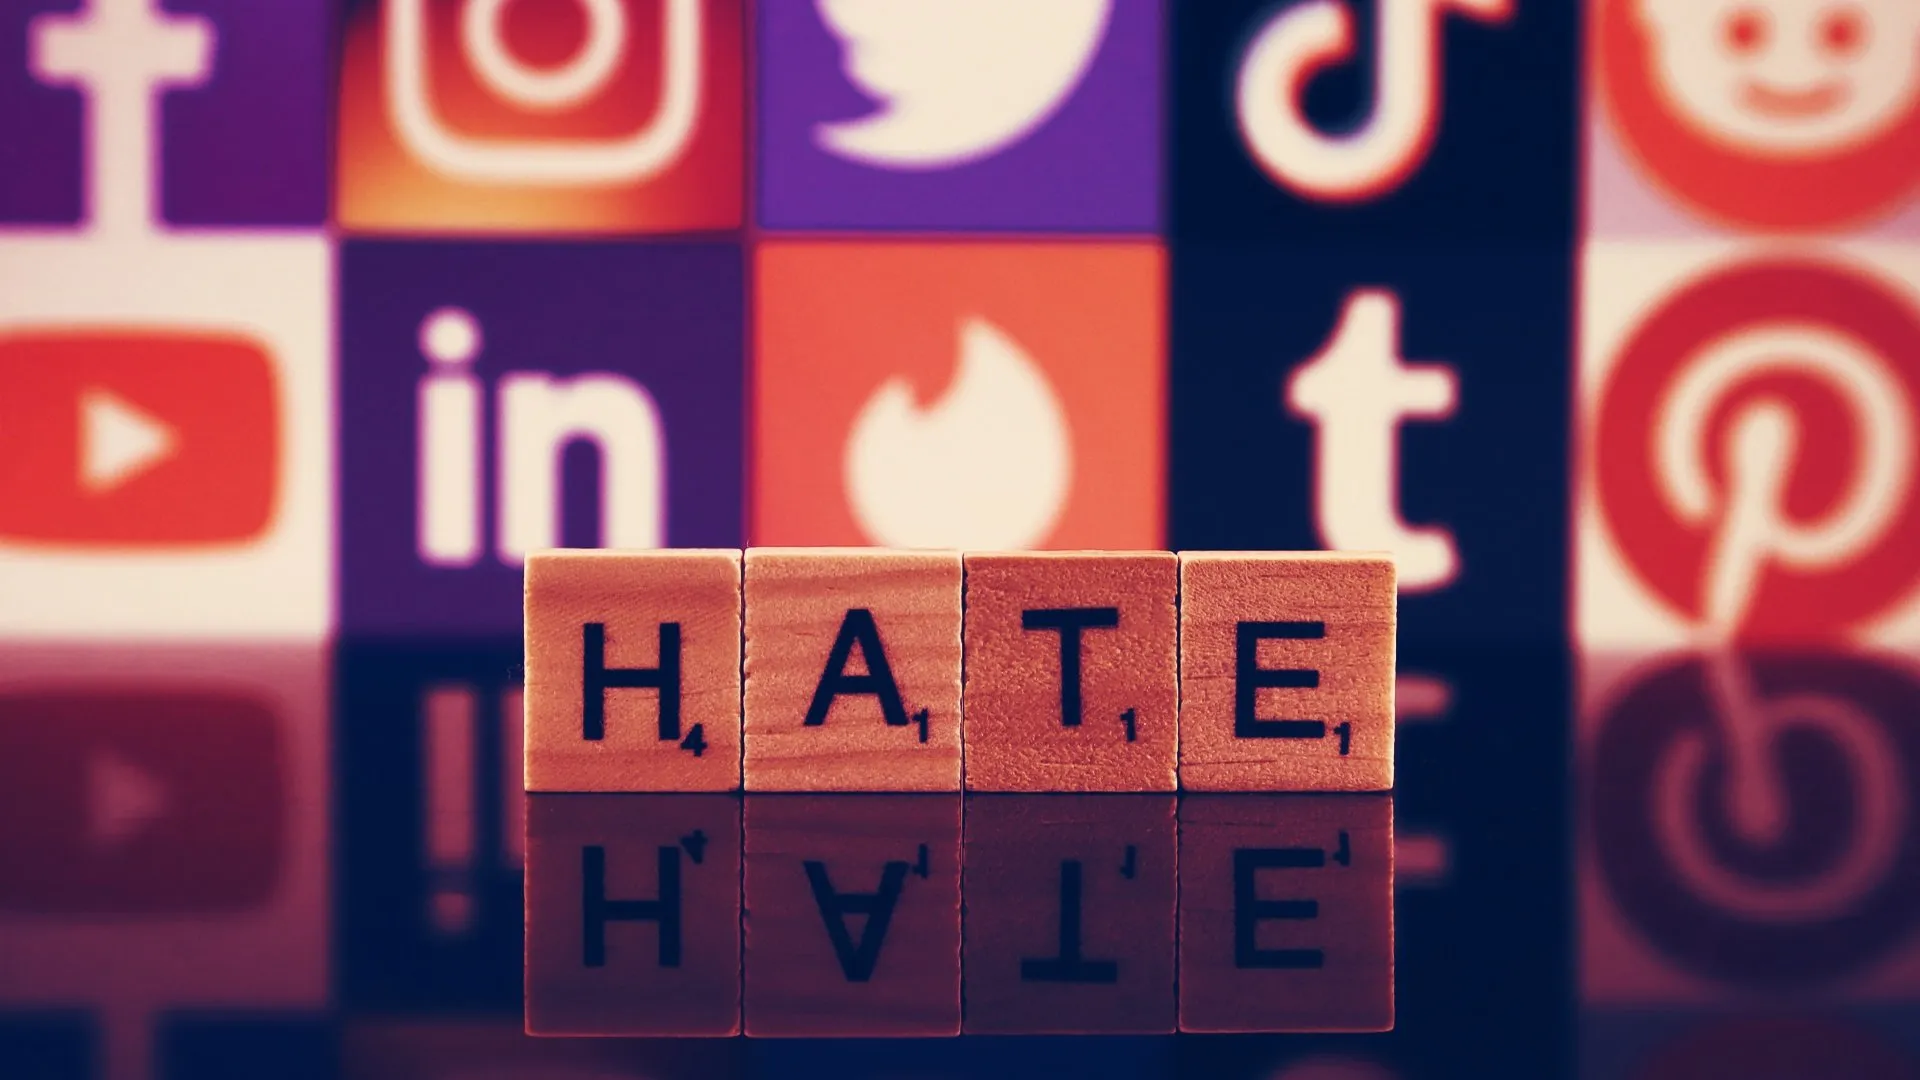 Reddit and YouTube target users promoting hate, removing thousands of subreddits and YouTube channels. Image: Shutterstock